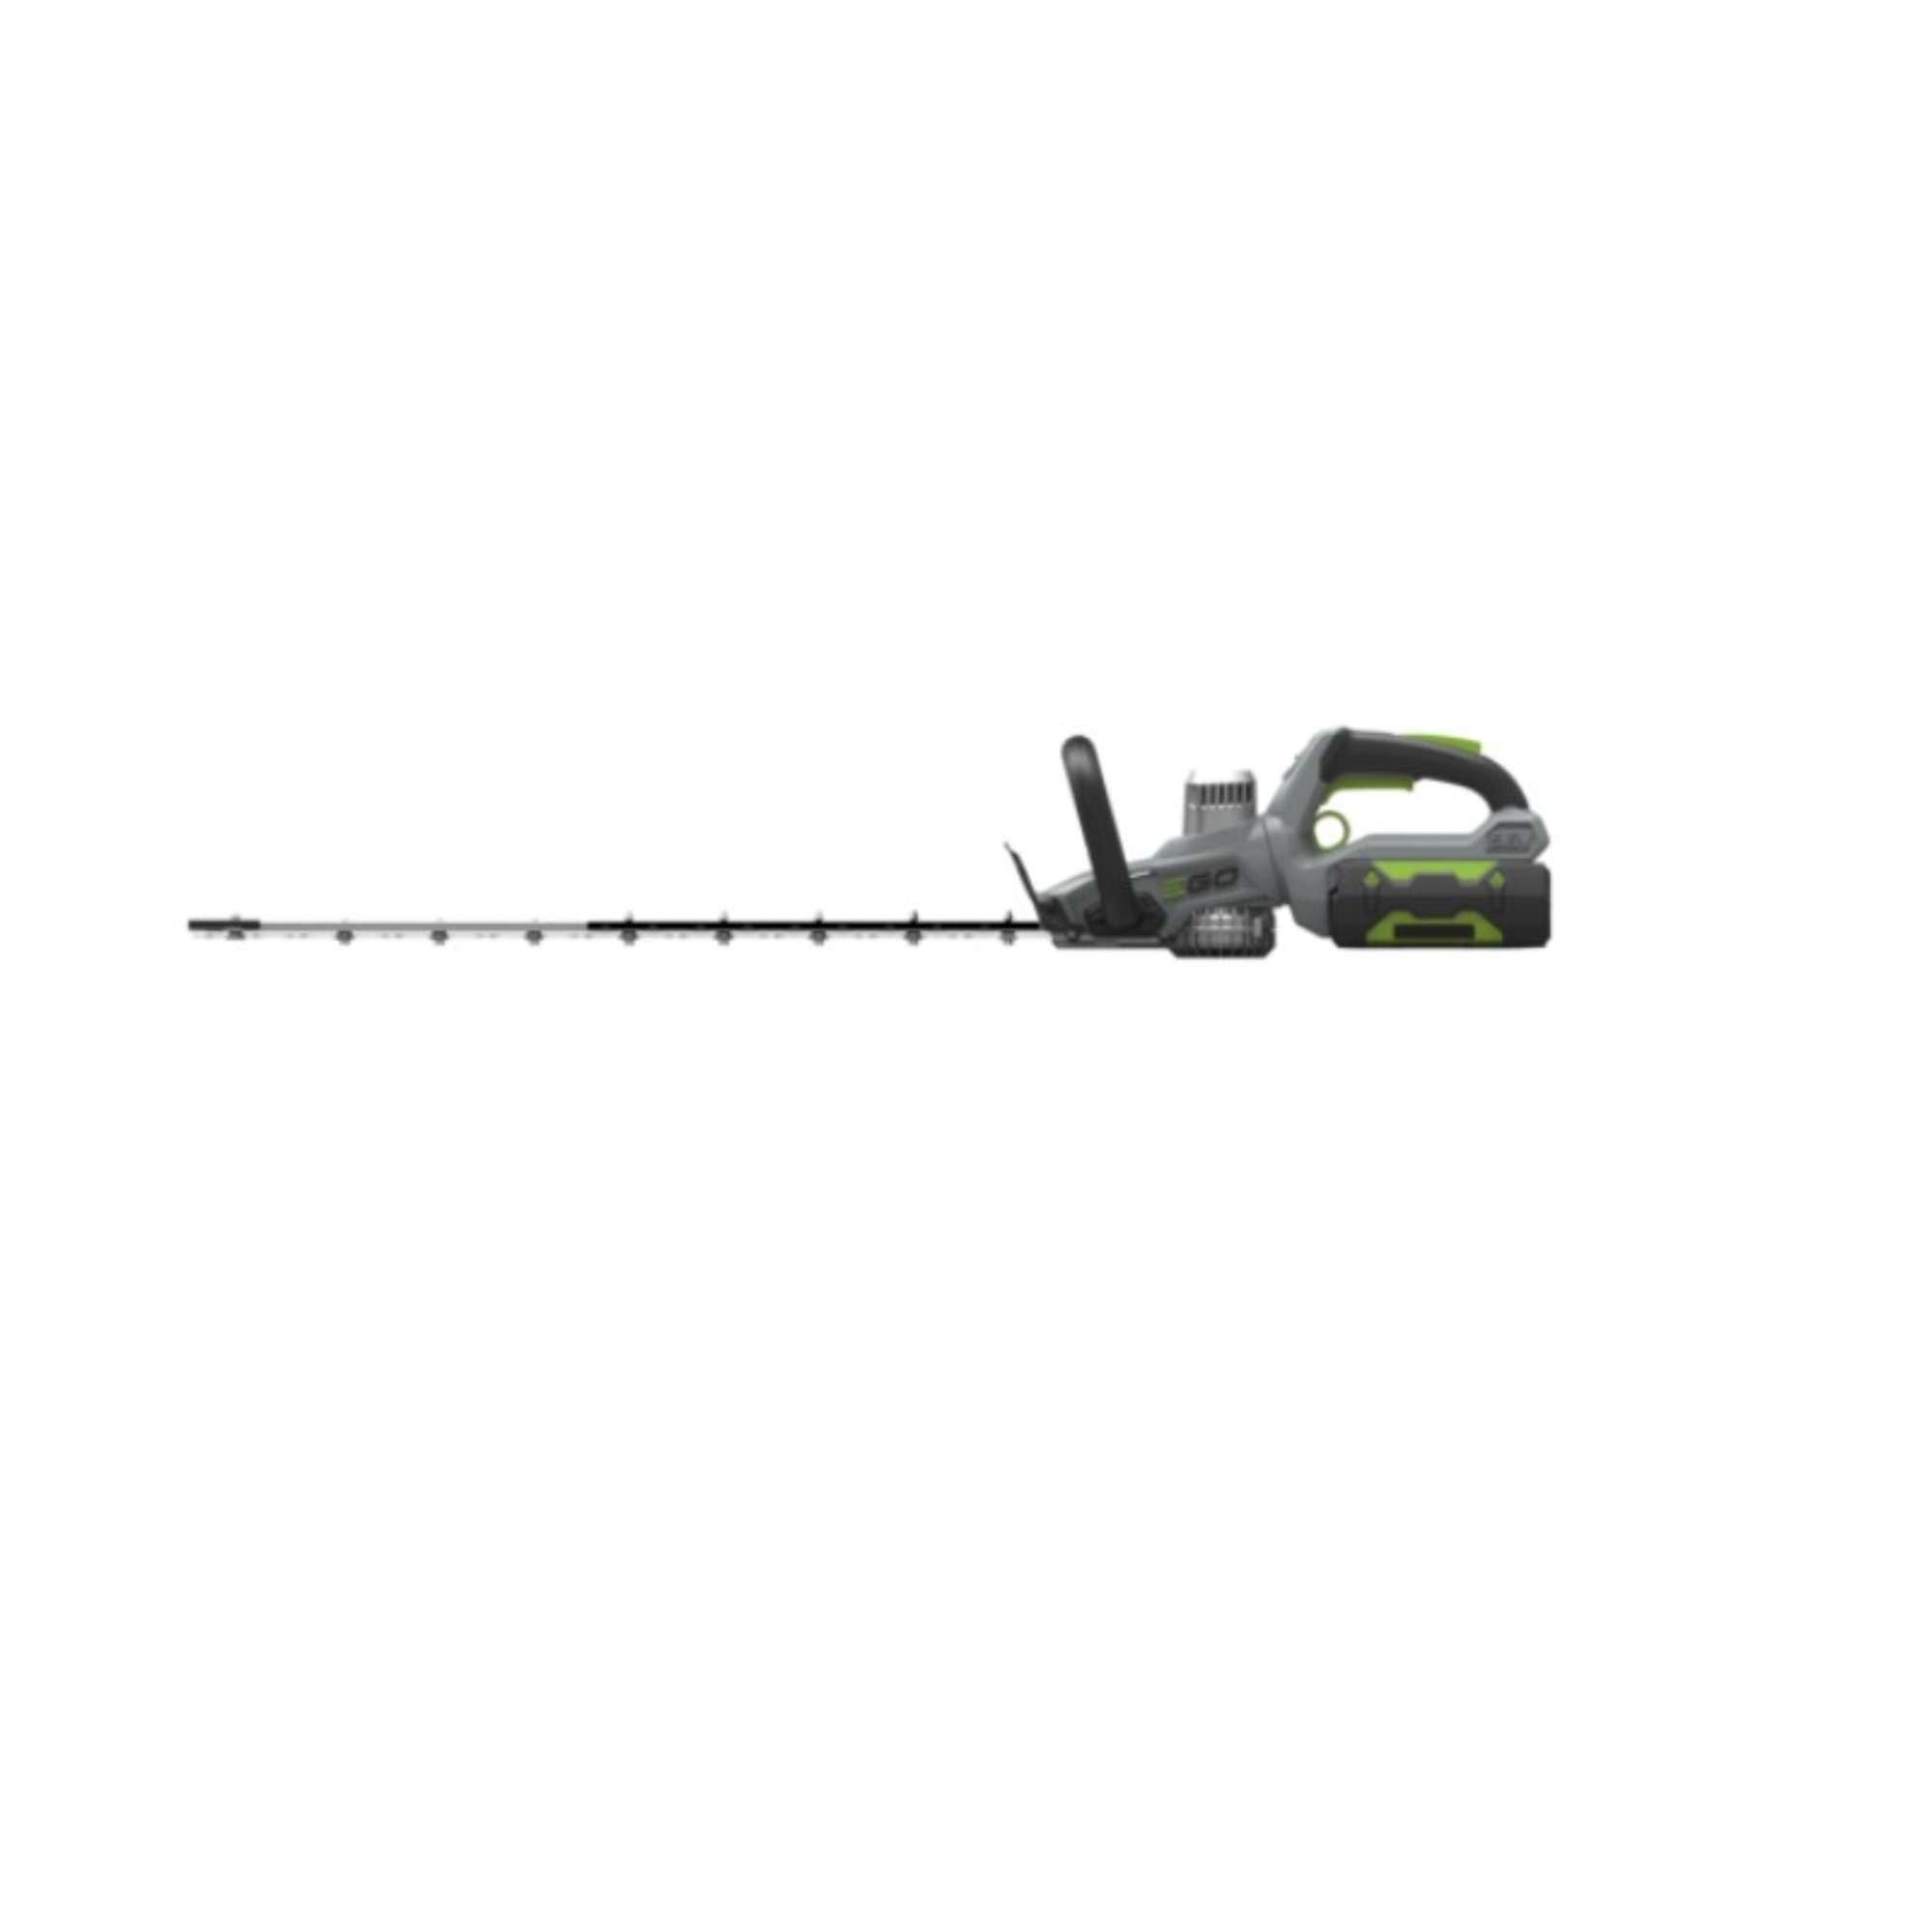 65cm body-only hedge trimmer - Ego 30408 HT6500E